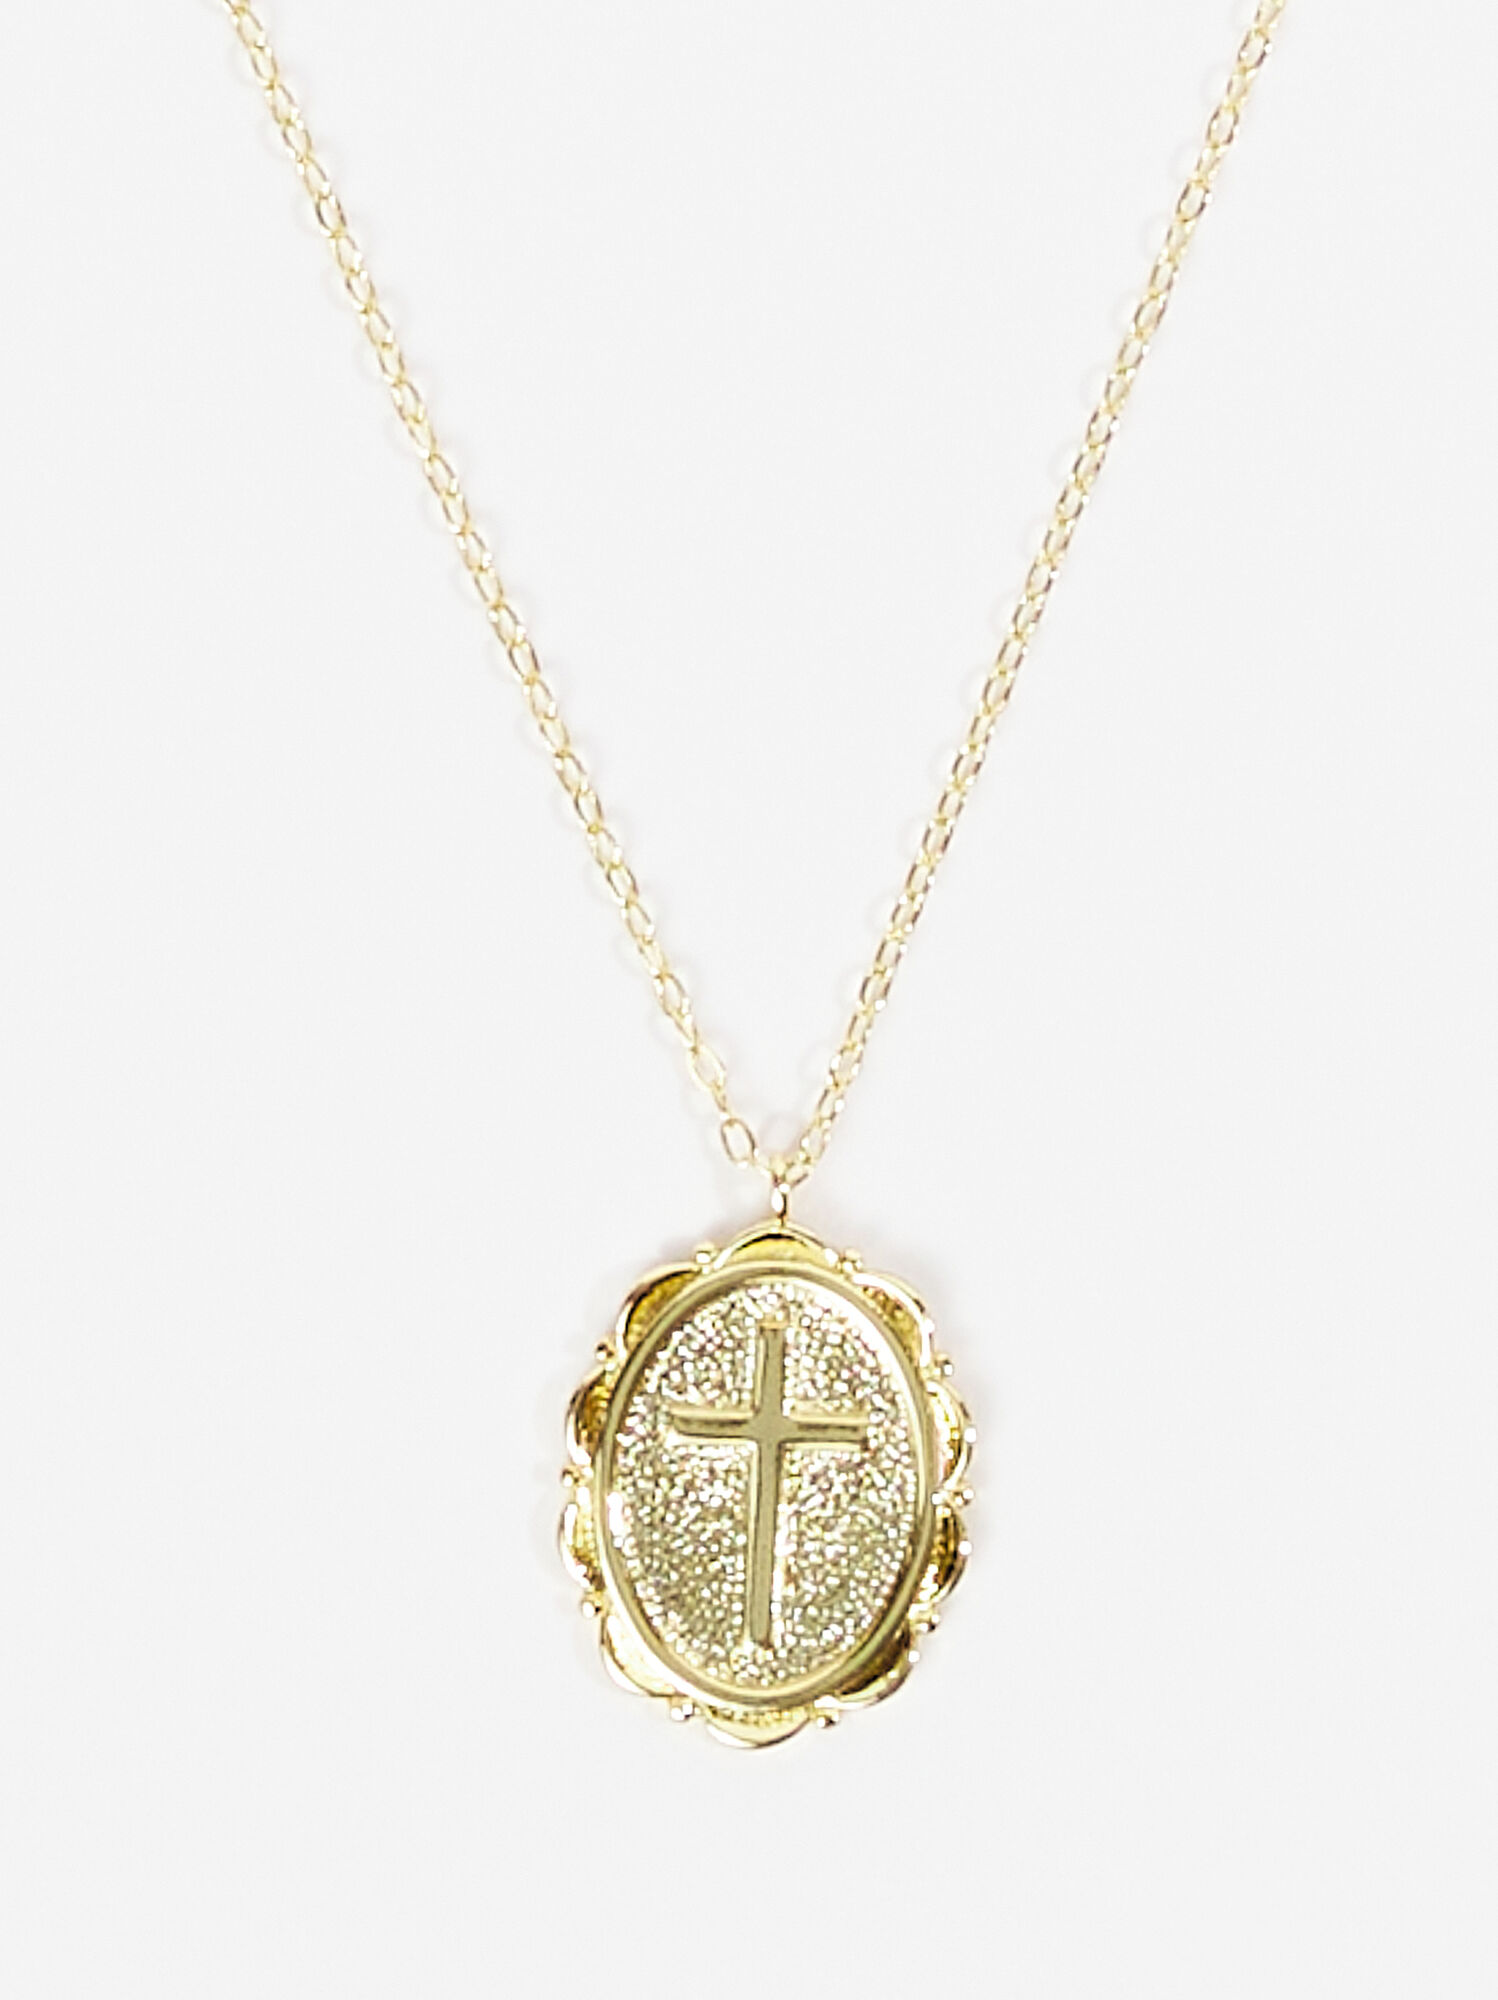 18K Gold Oval Cross Charm Necklace | Altar'd State